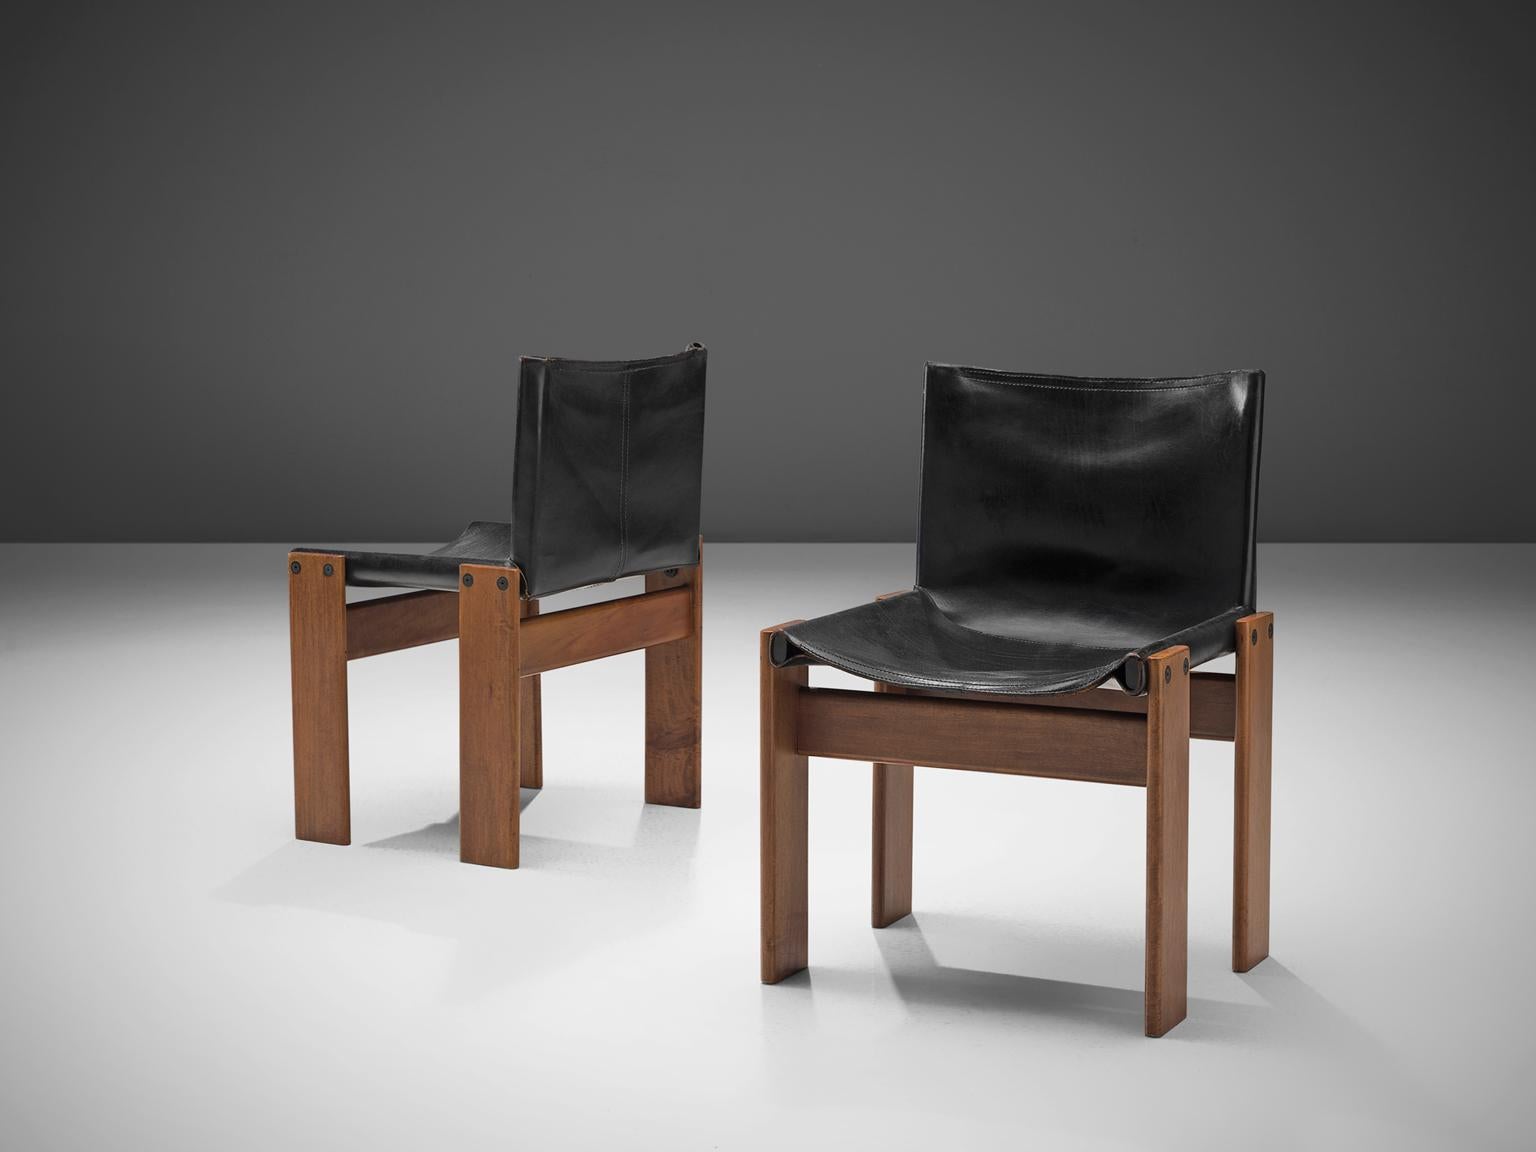 Italian Afra & Tobia Scarpa 'Monk' Set of Four Chairs in Black Leather